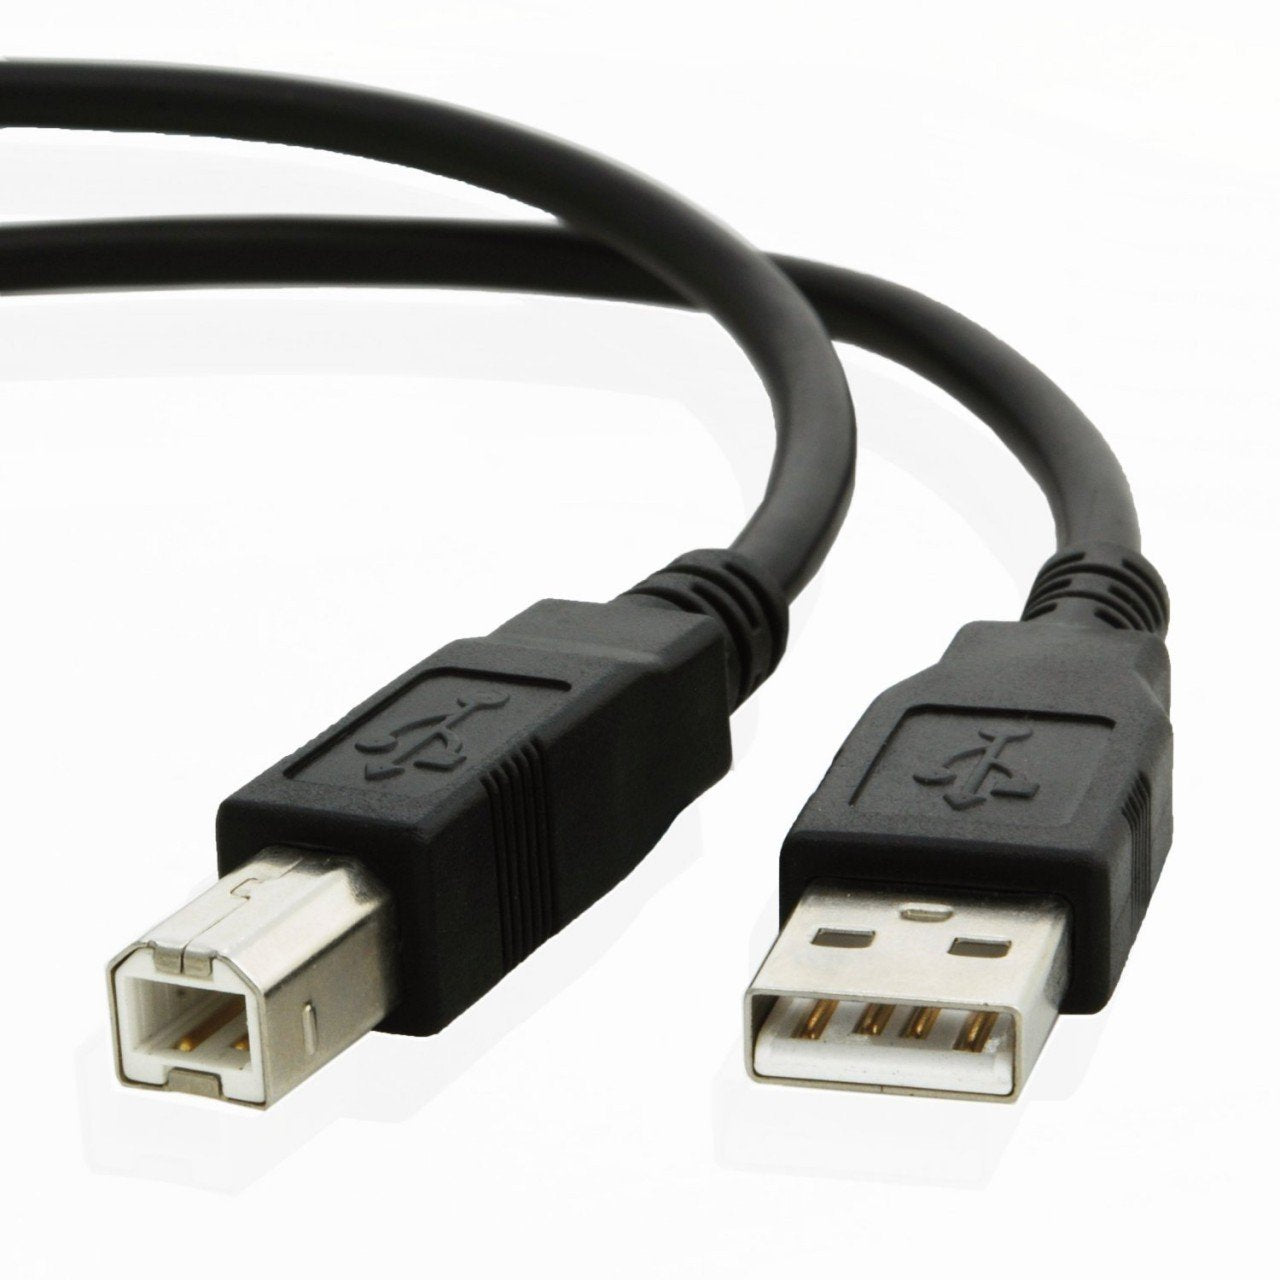 USB cable for Epson OMNILINK TM-T88VI